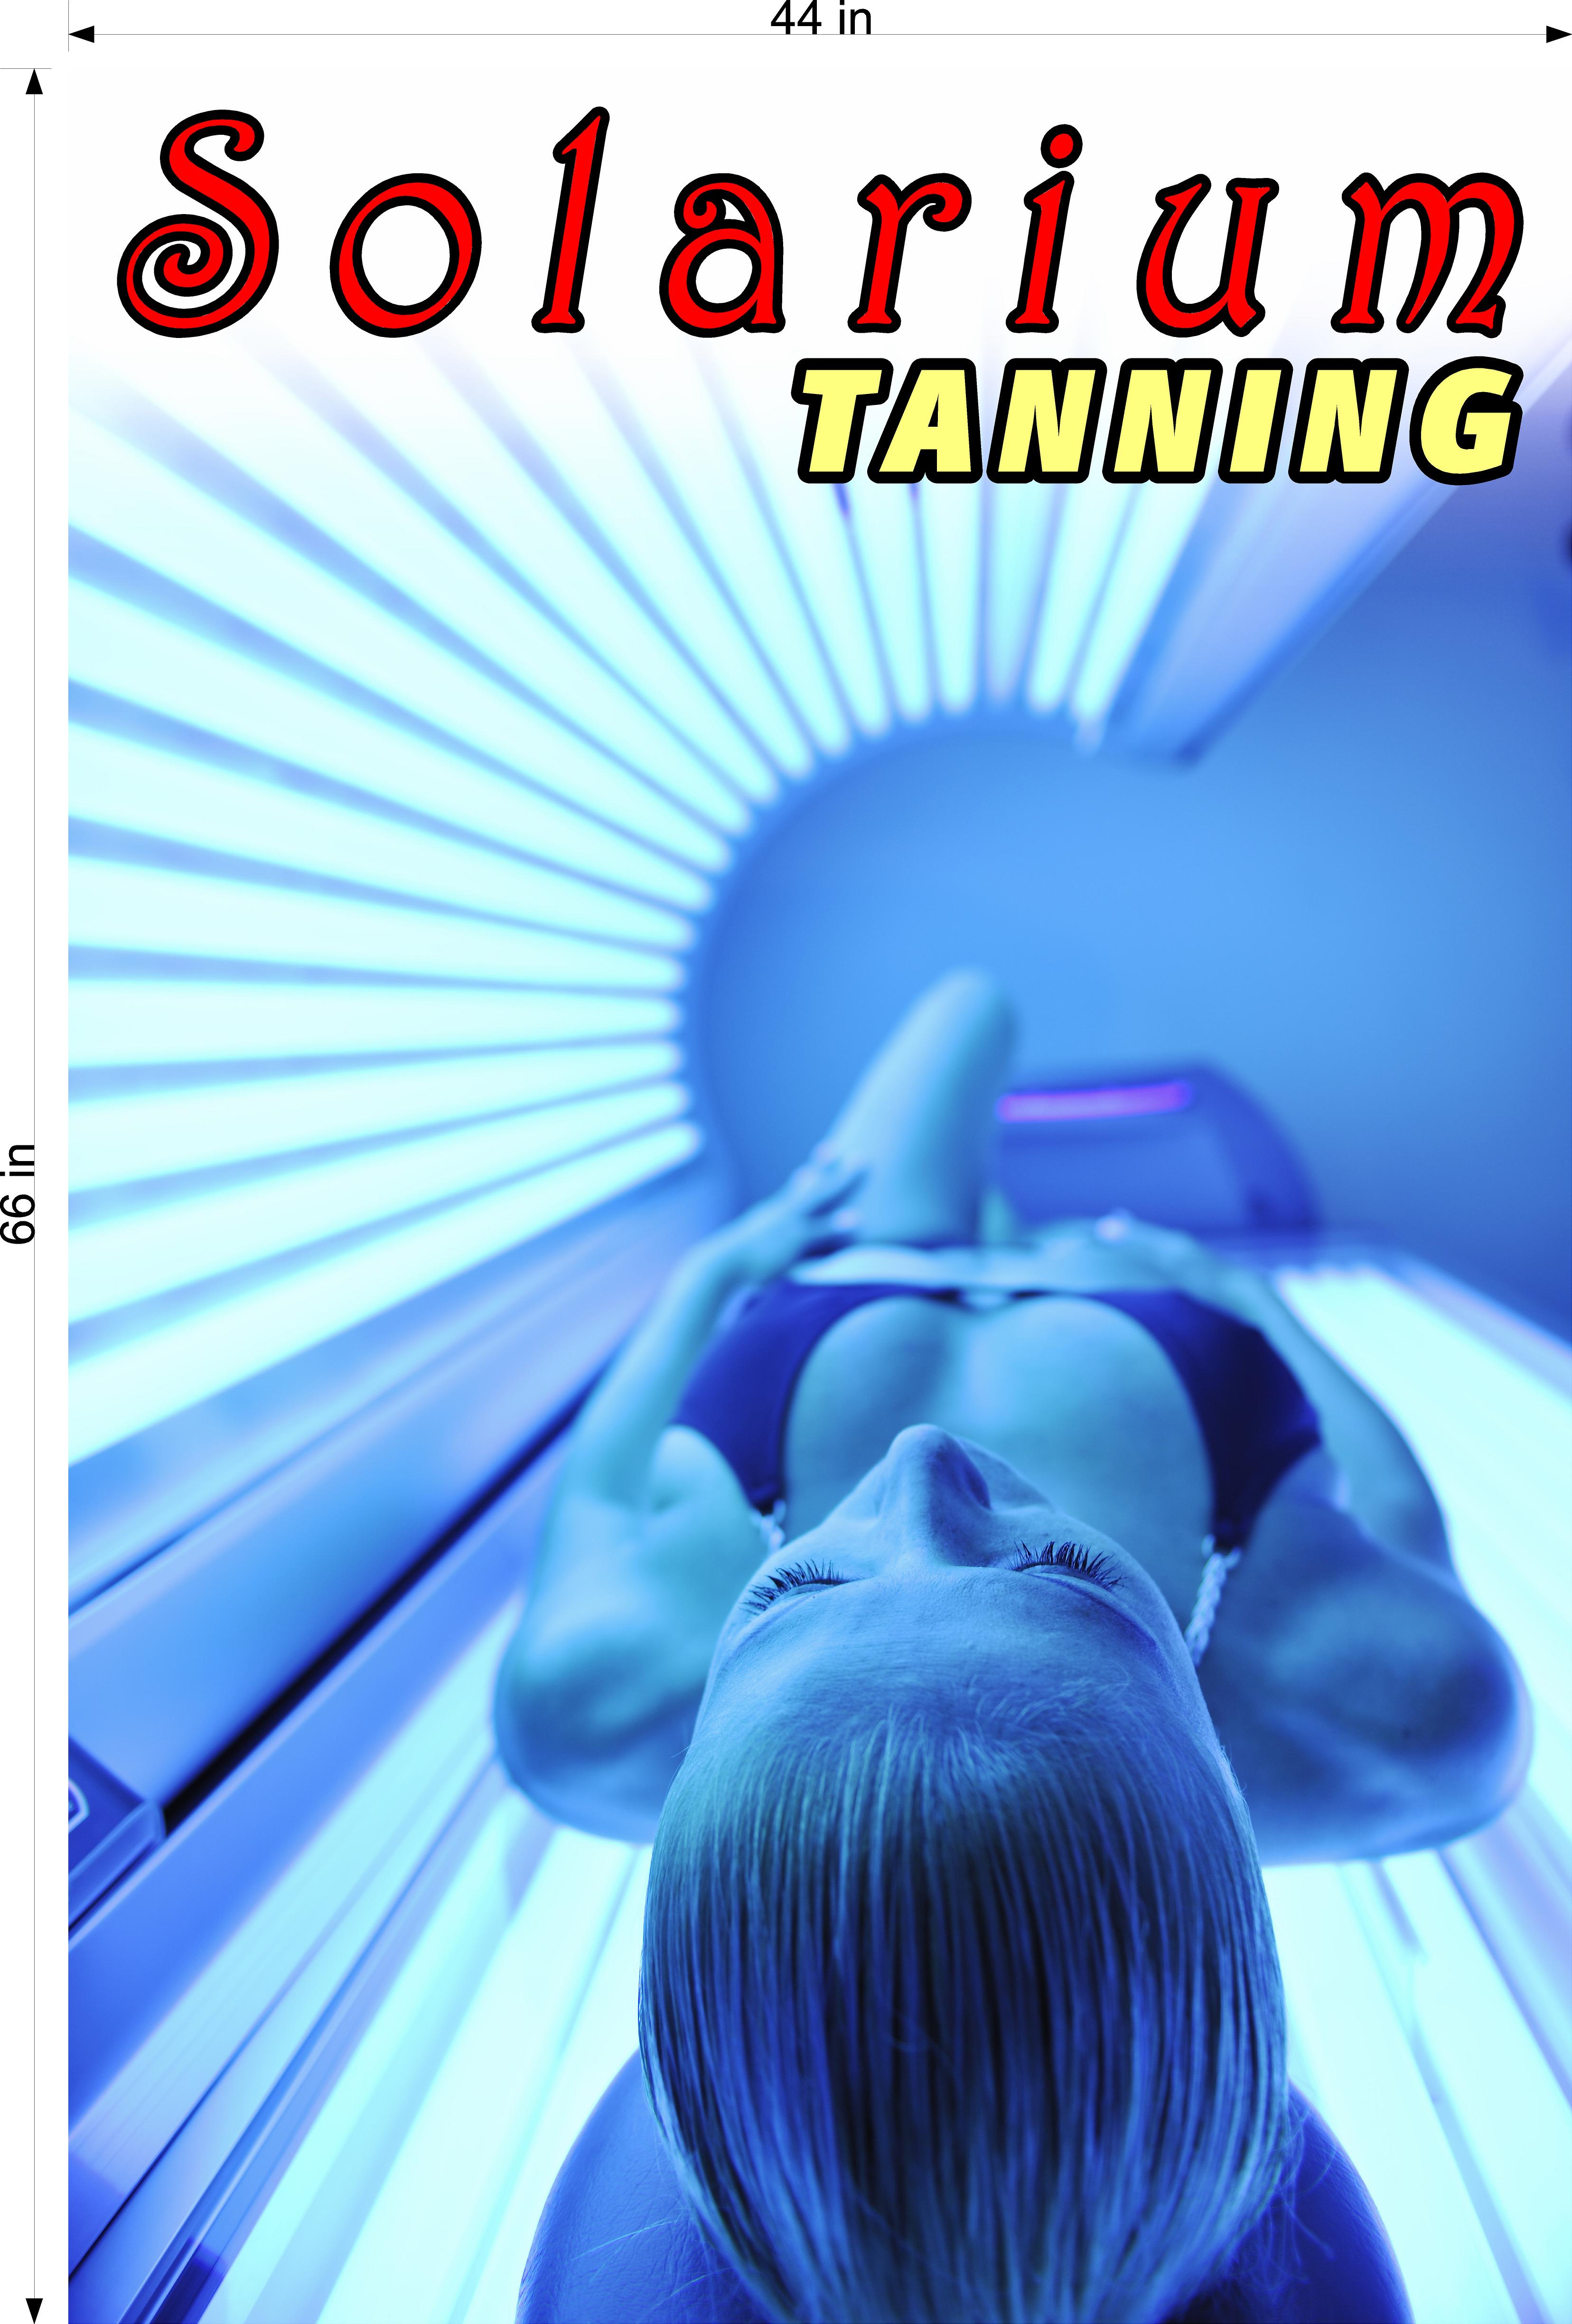 Tanning 02 Photo-Realistic Paper Poster Premium Interior Inside Sign Wall Window Non-Laminated Vertical